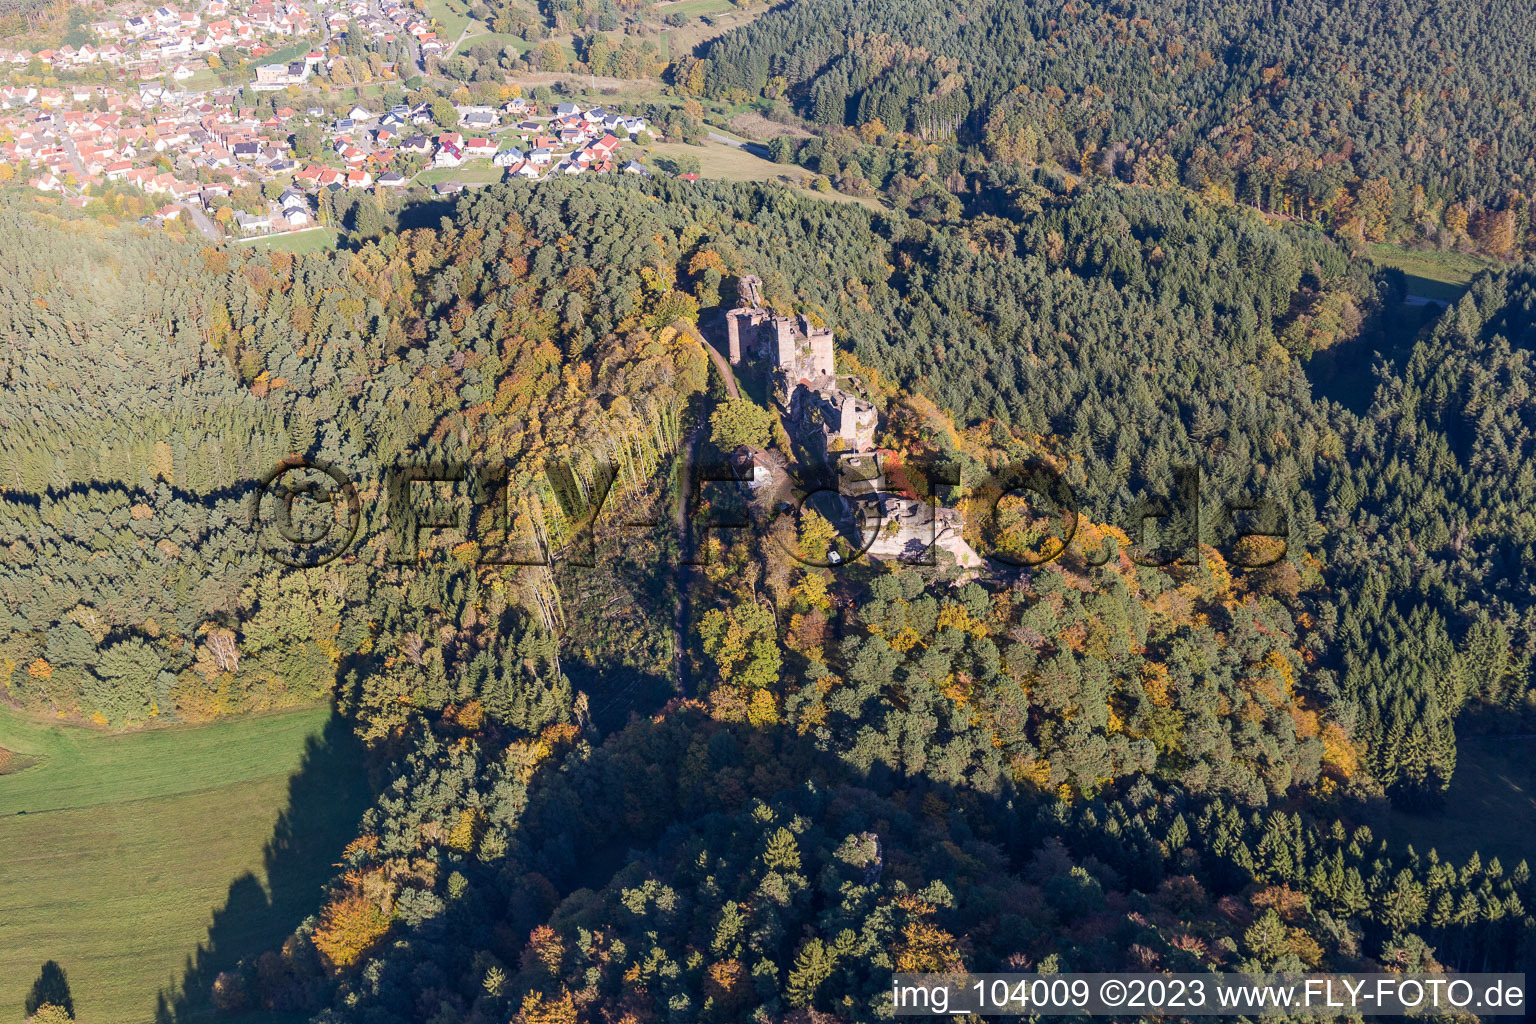 Dahn in the state Rhineland-Palatinate, Germany seen from above